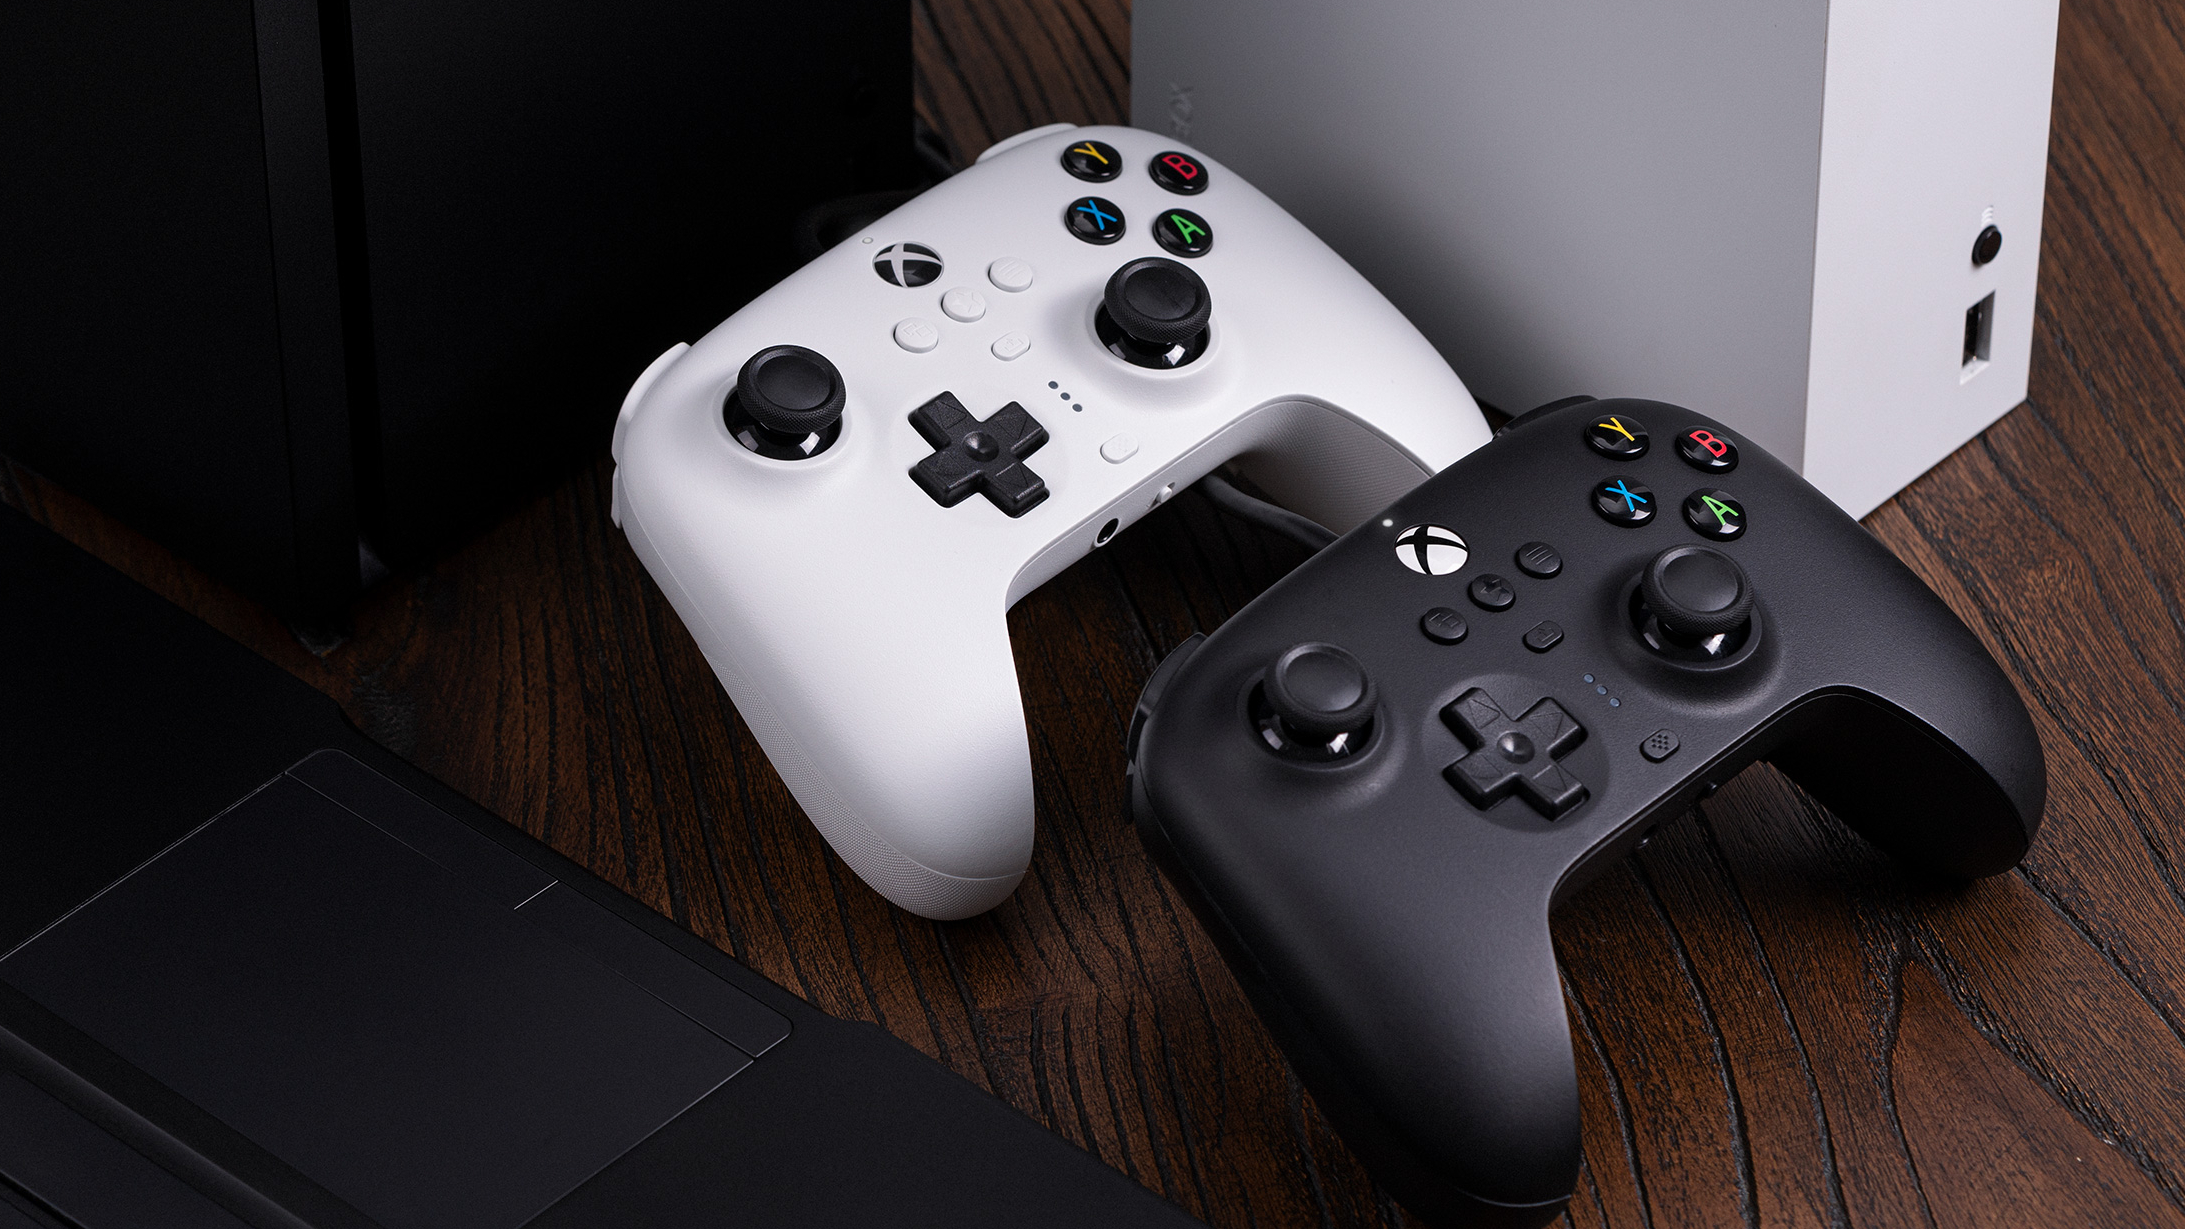 8BitDo's Xbox controller includes high-end features at an affordable price